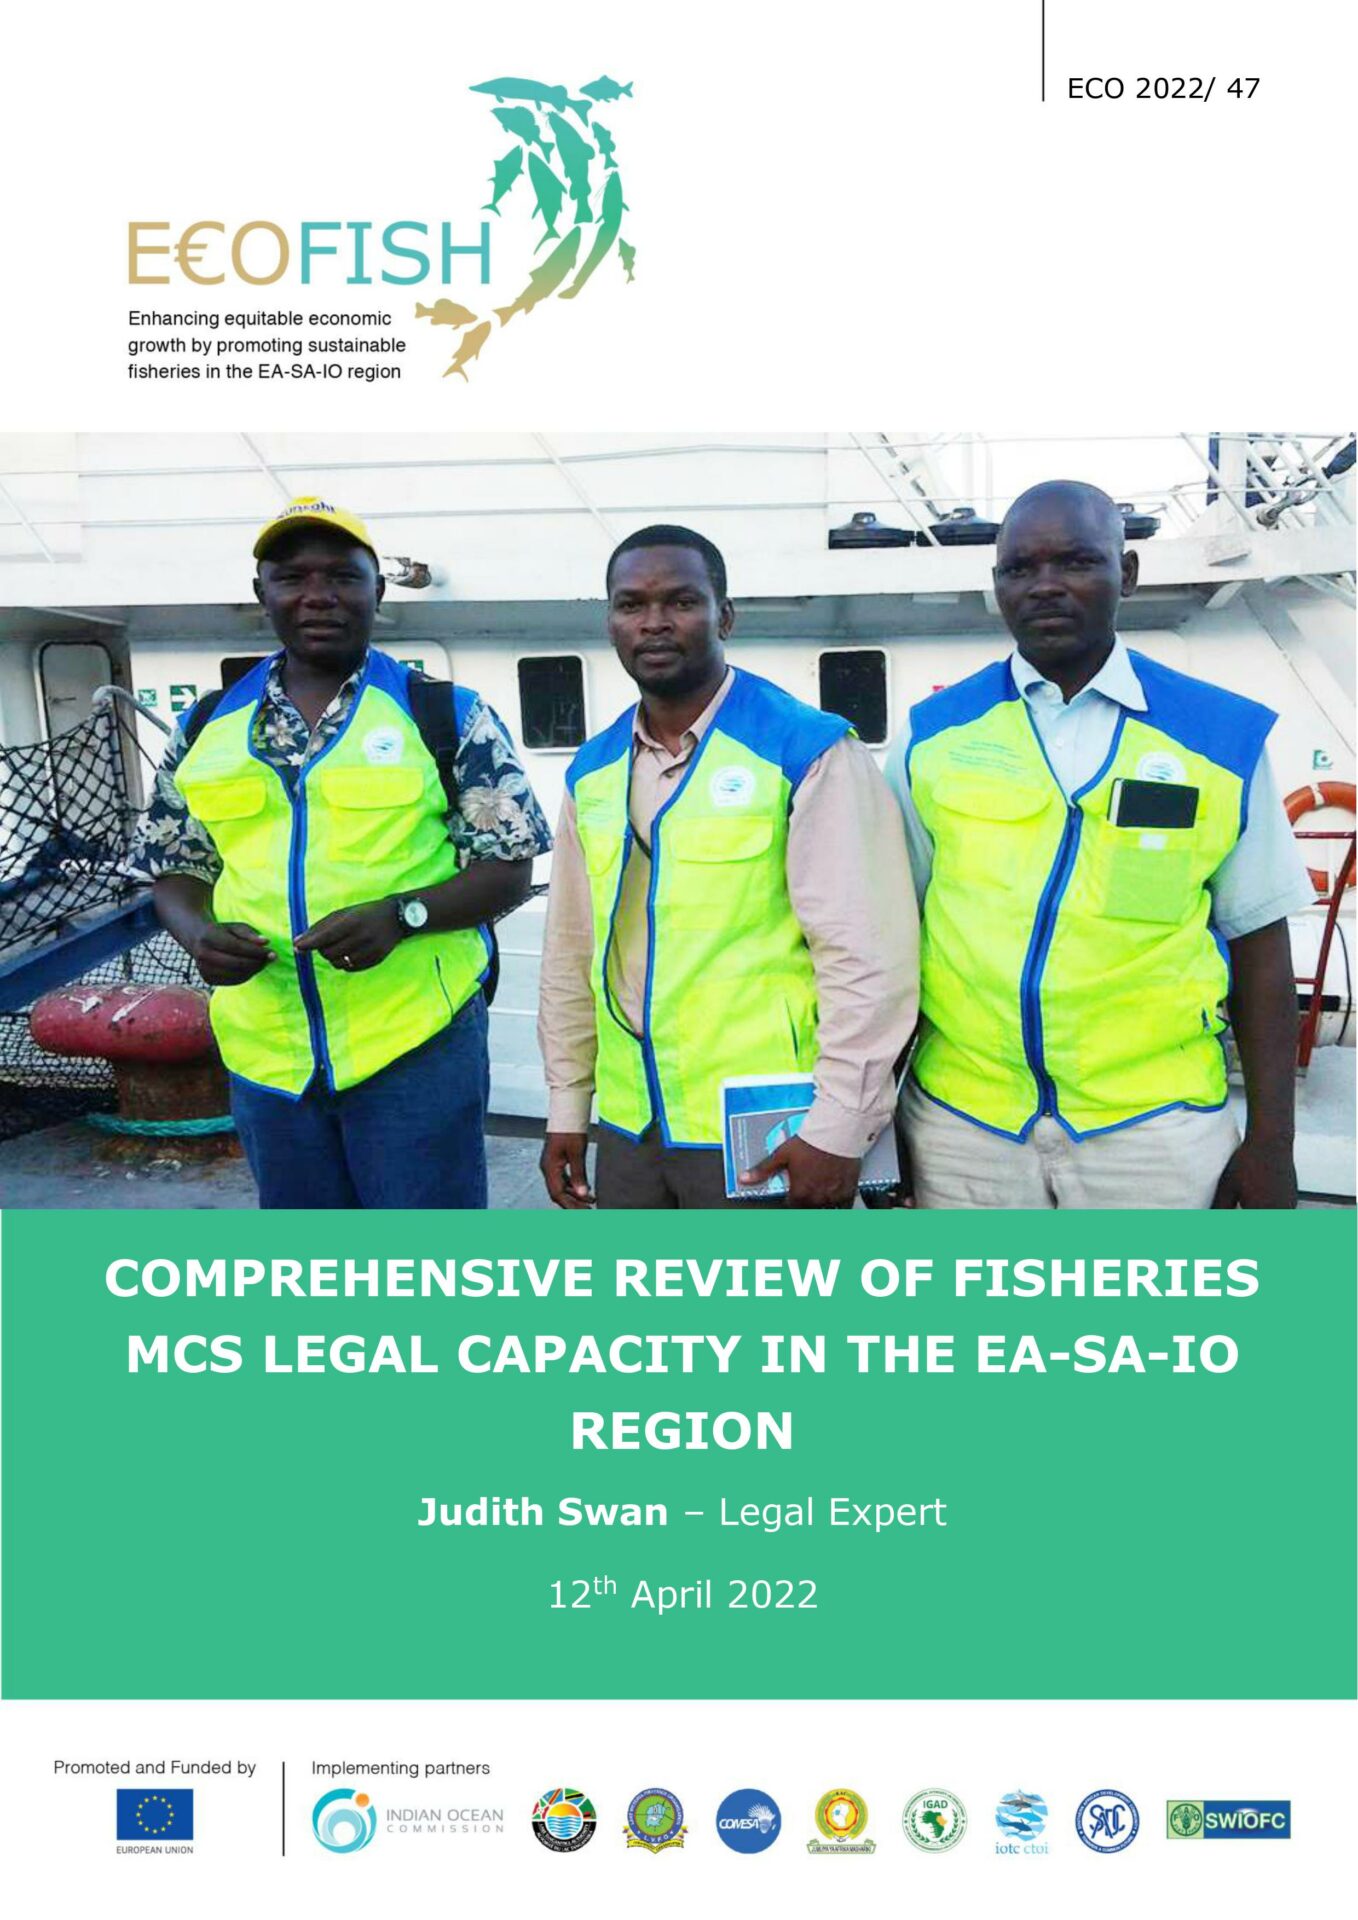 COMPREHENSIVE-REVIEW-OF-FISHERIES-MCS-LEGAL-CAPACITY-IN-THE-EA-SA-IO-REGION